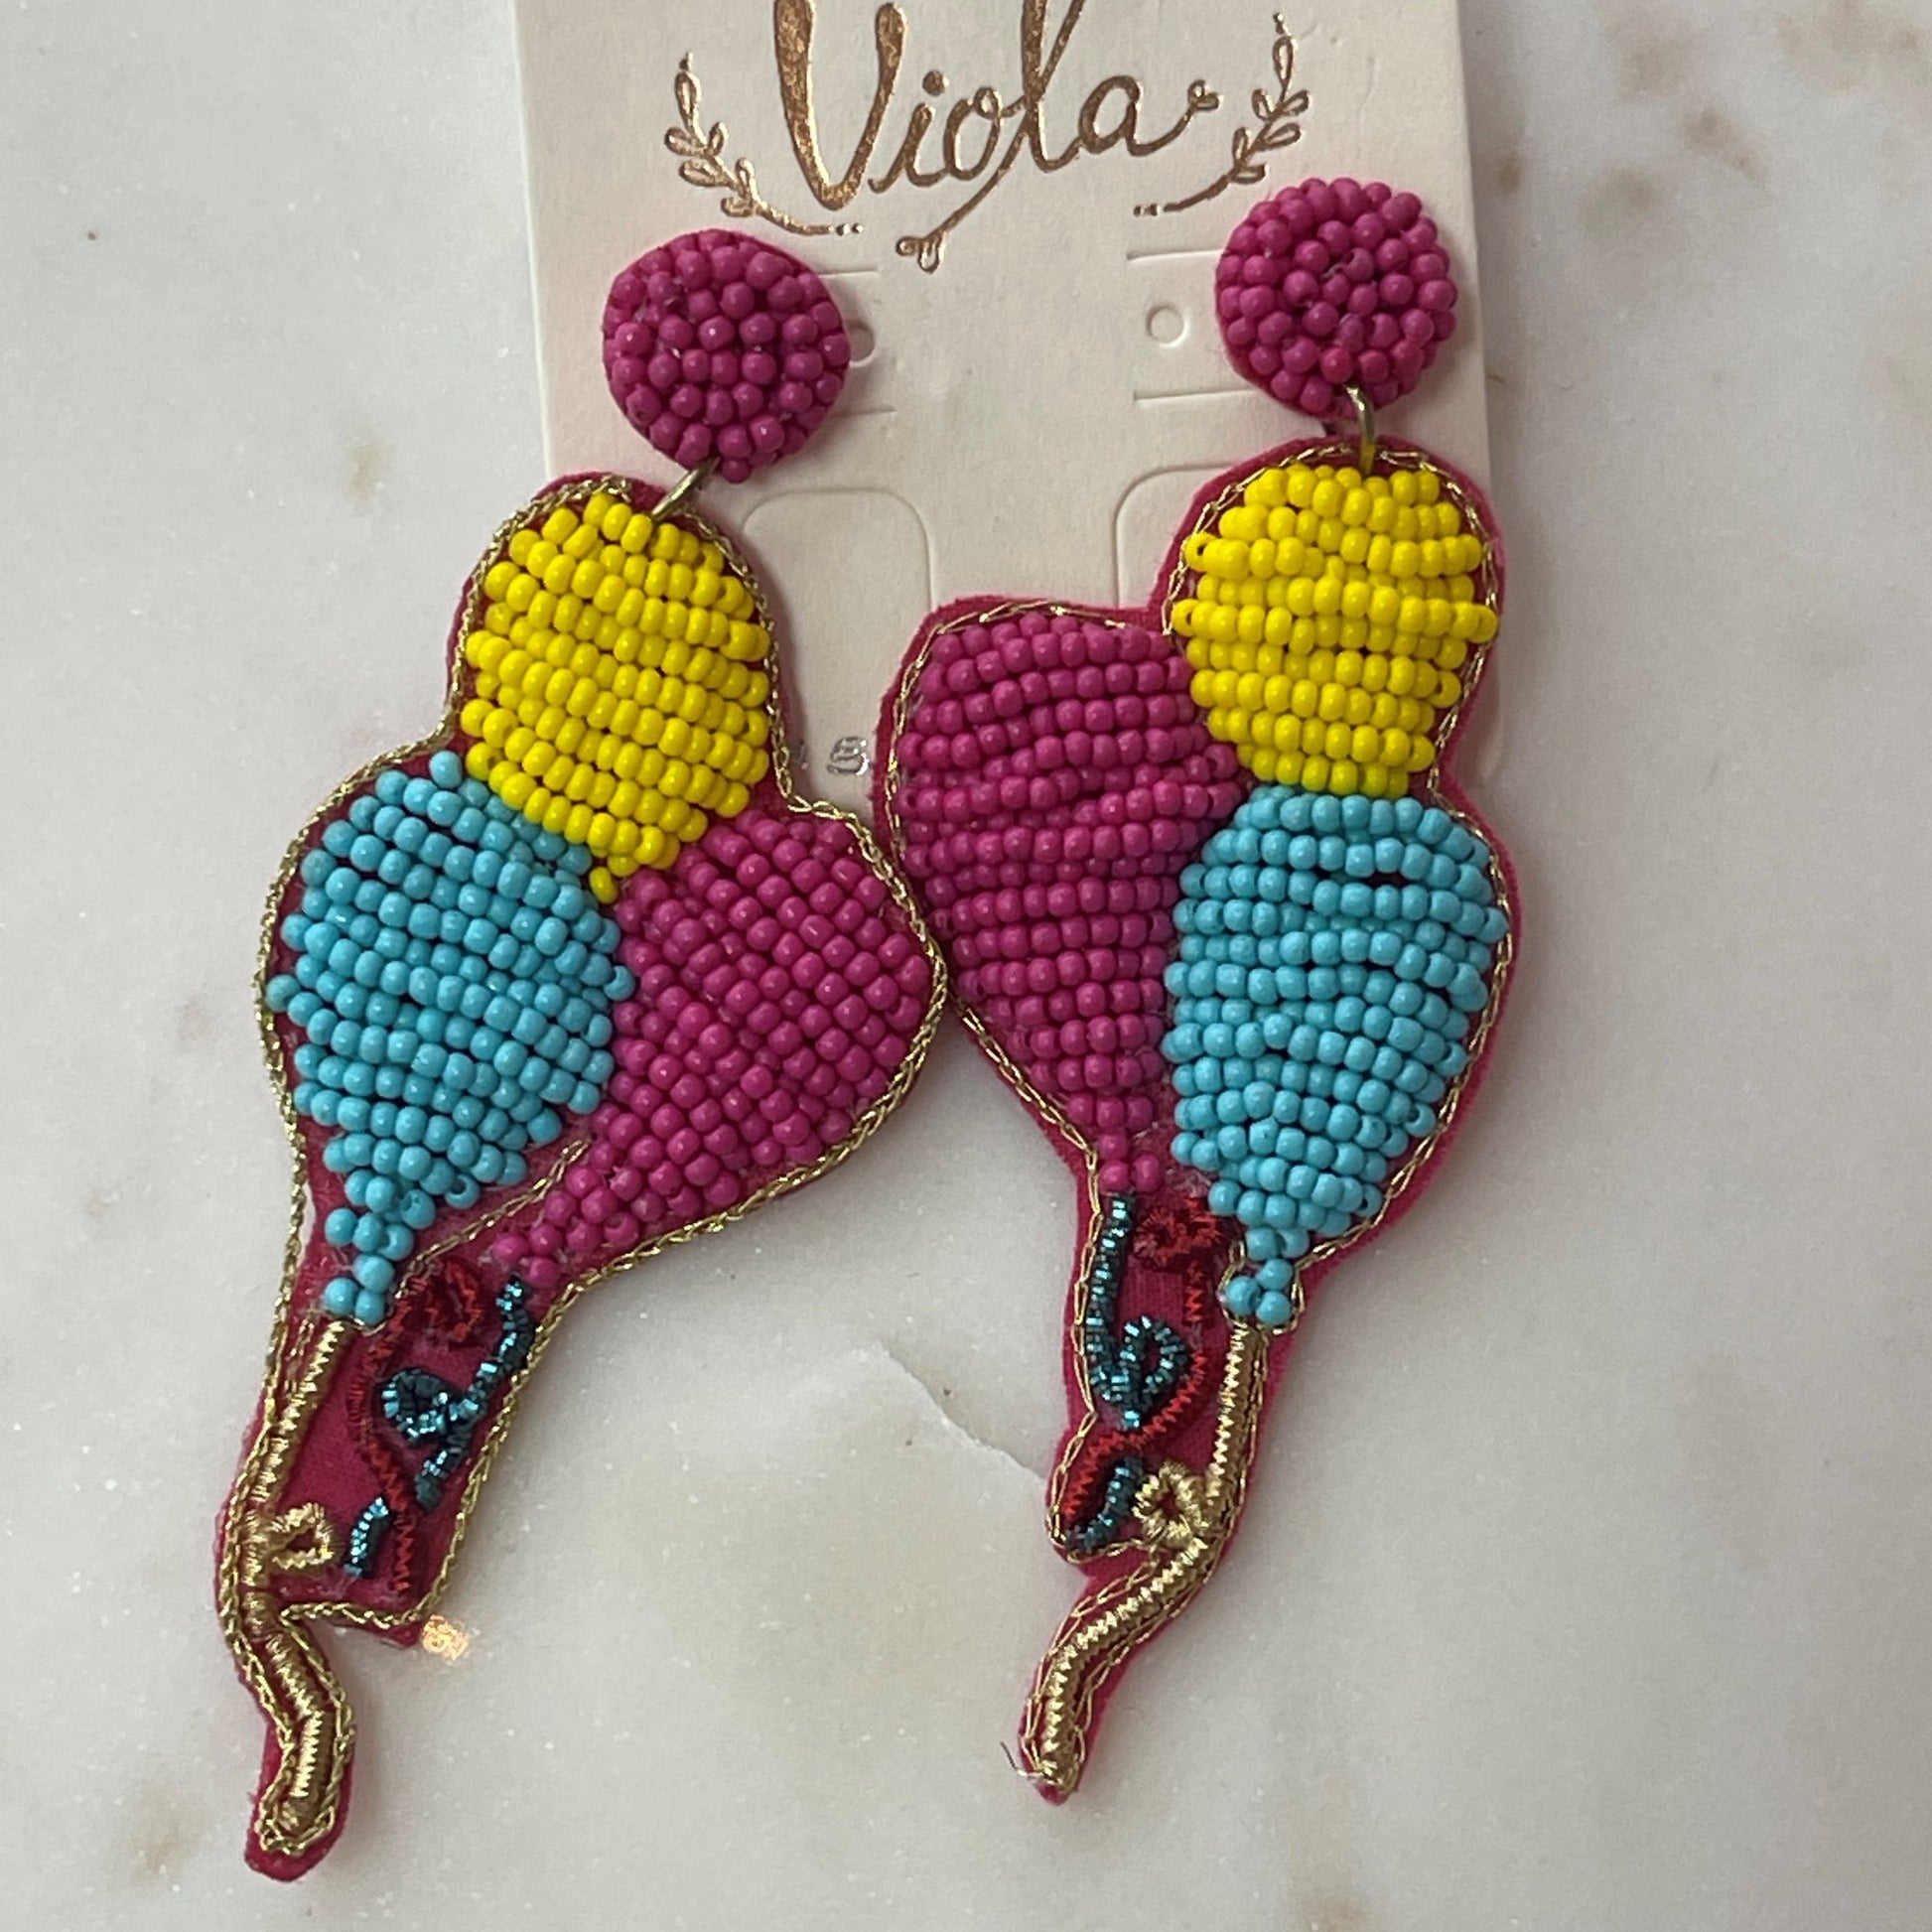 Beaded Balloon Earrings - Pink, Blue and Yellow